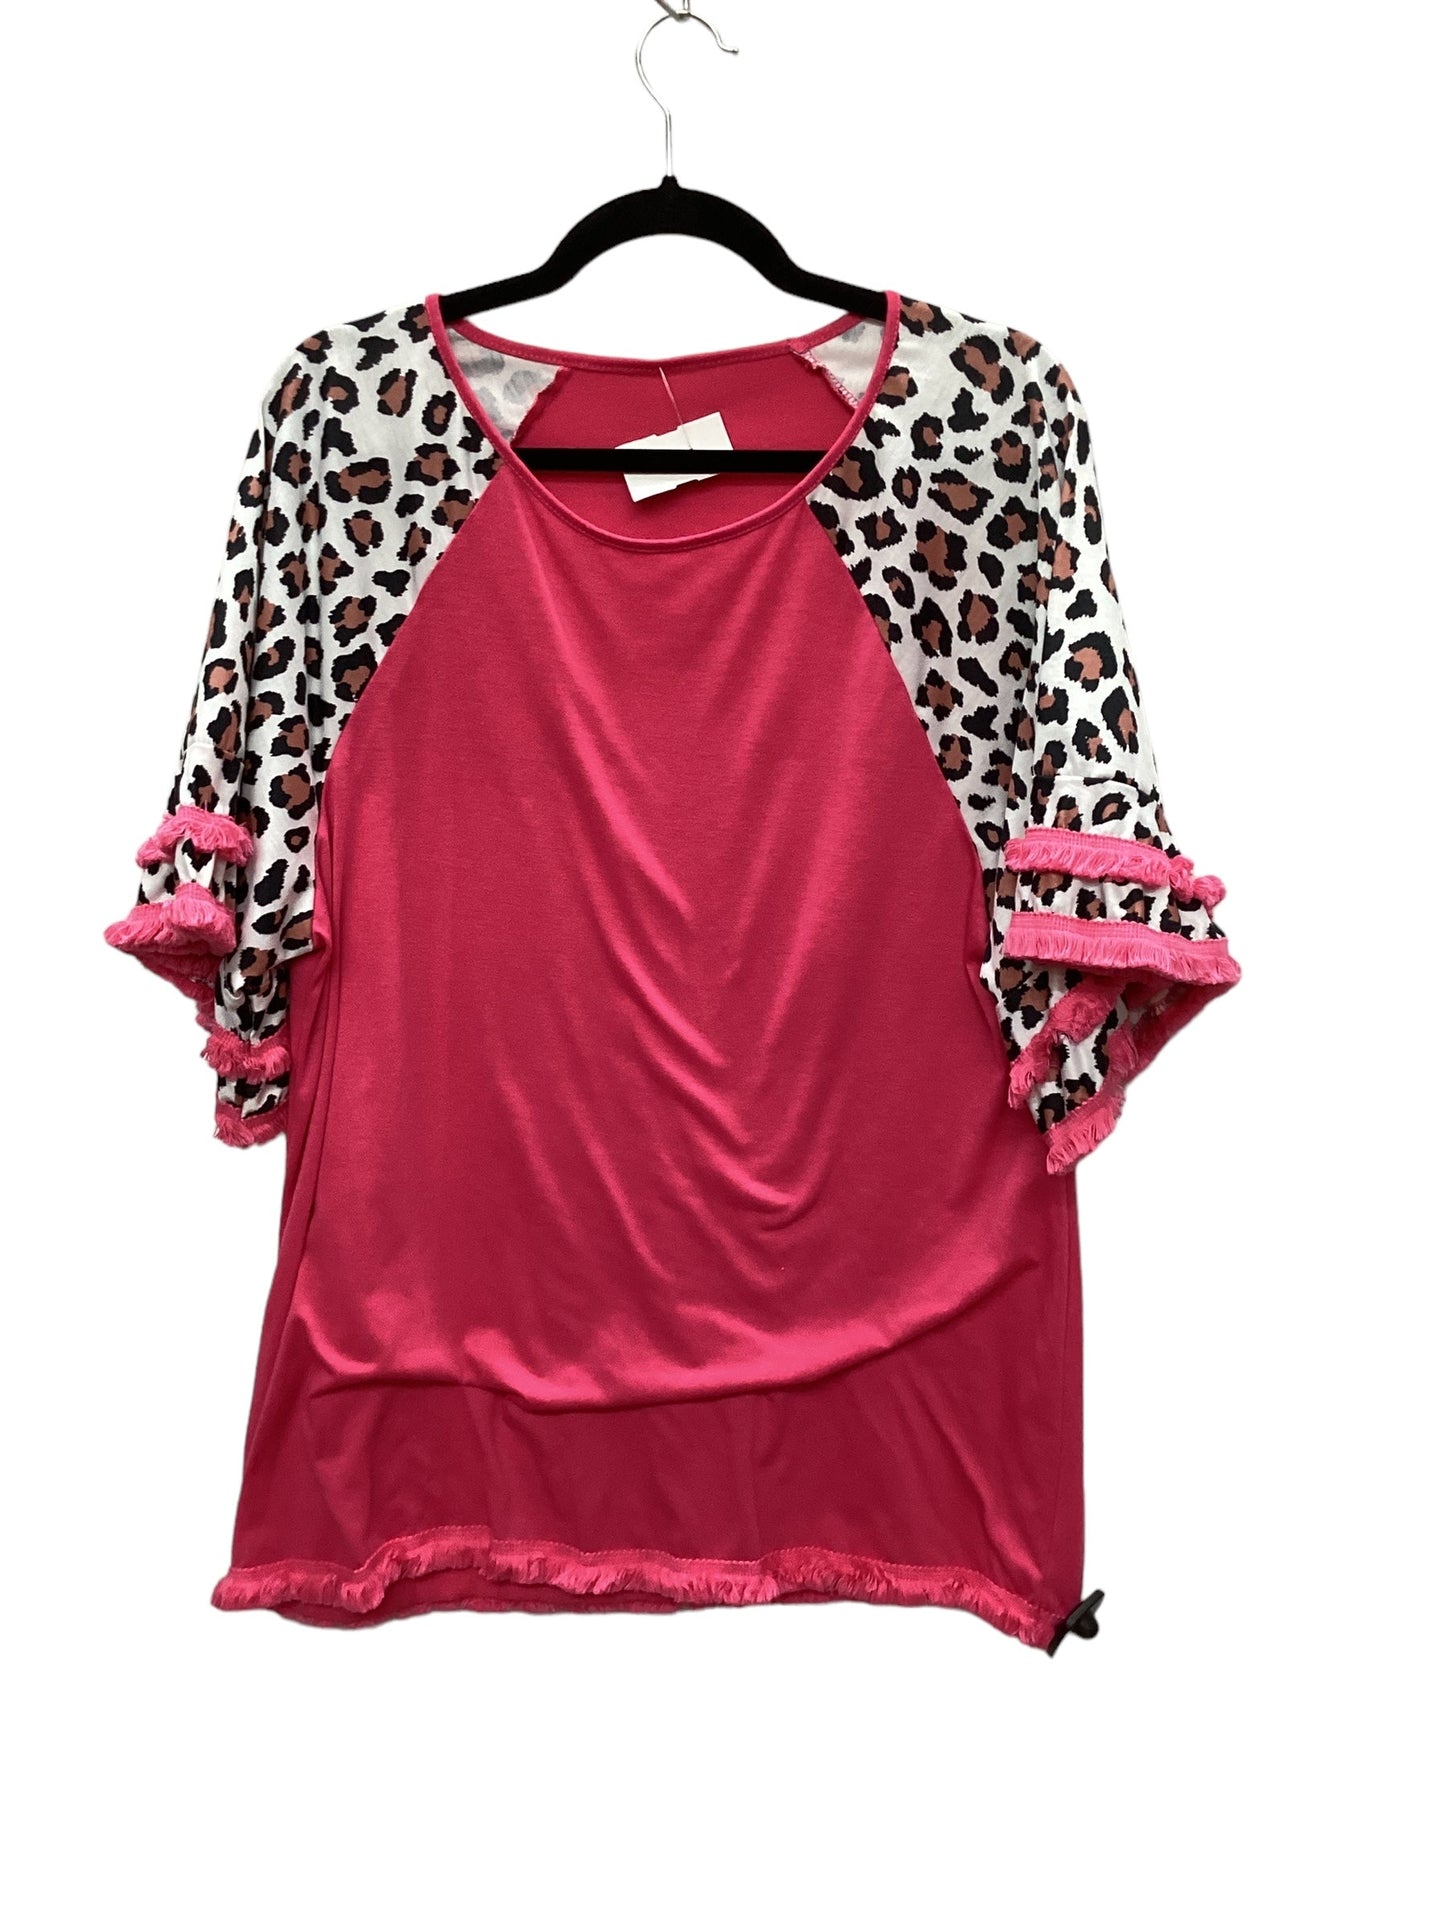 Pink Top Short Sleeve Shein, Size L